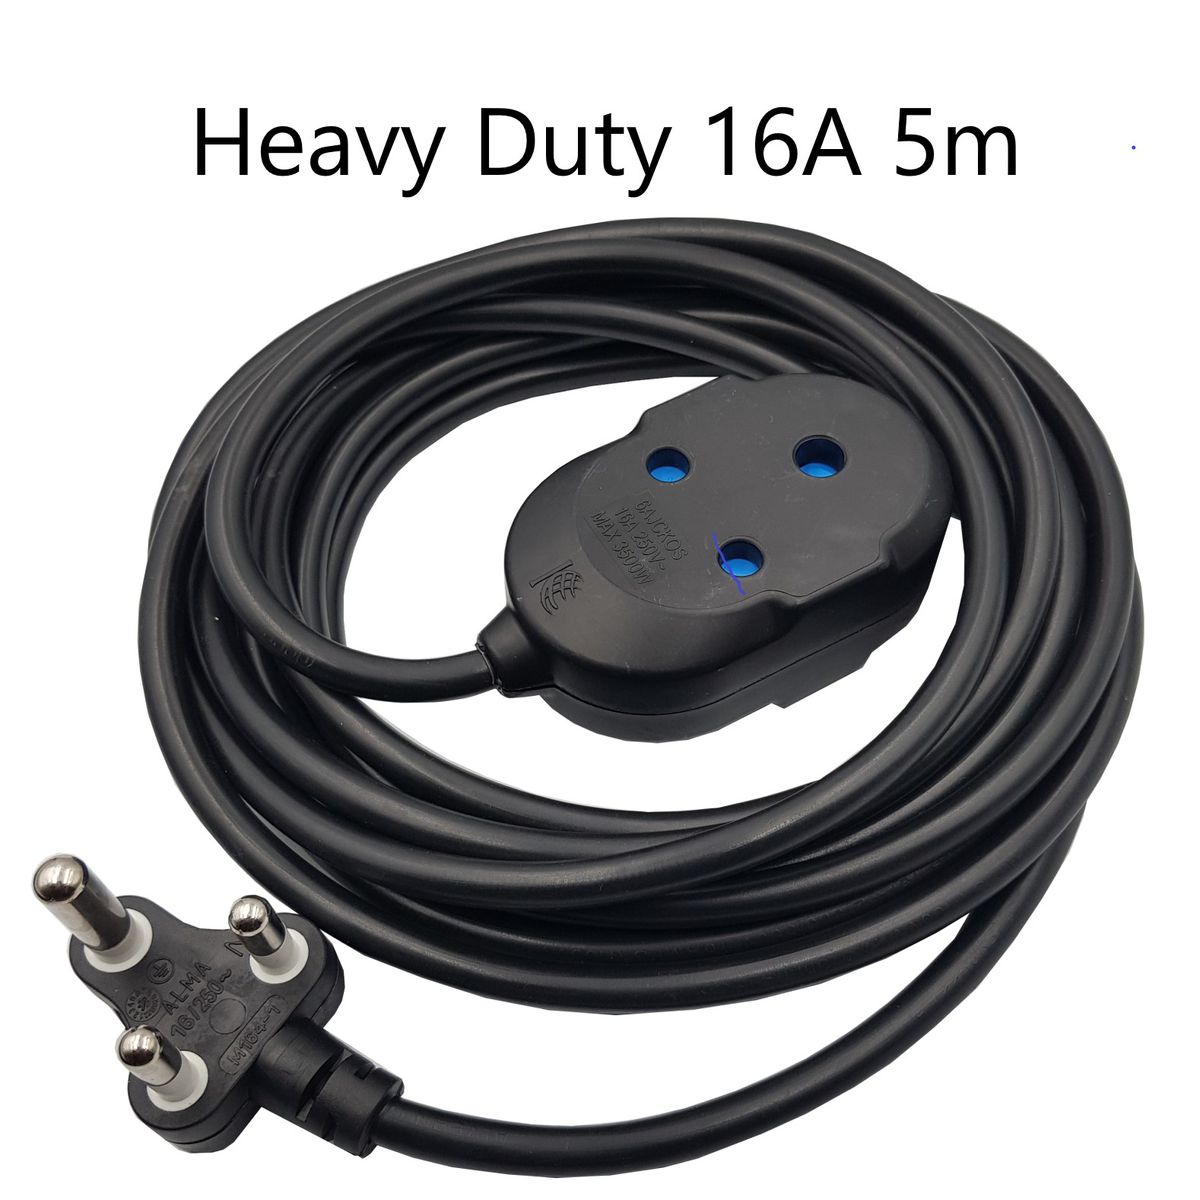 5m Black Heavy Duty 16A Extension Electrical Lead / Cable: Double Coupler